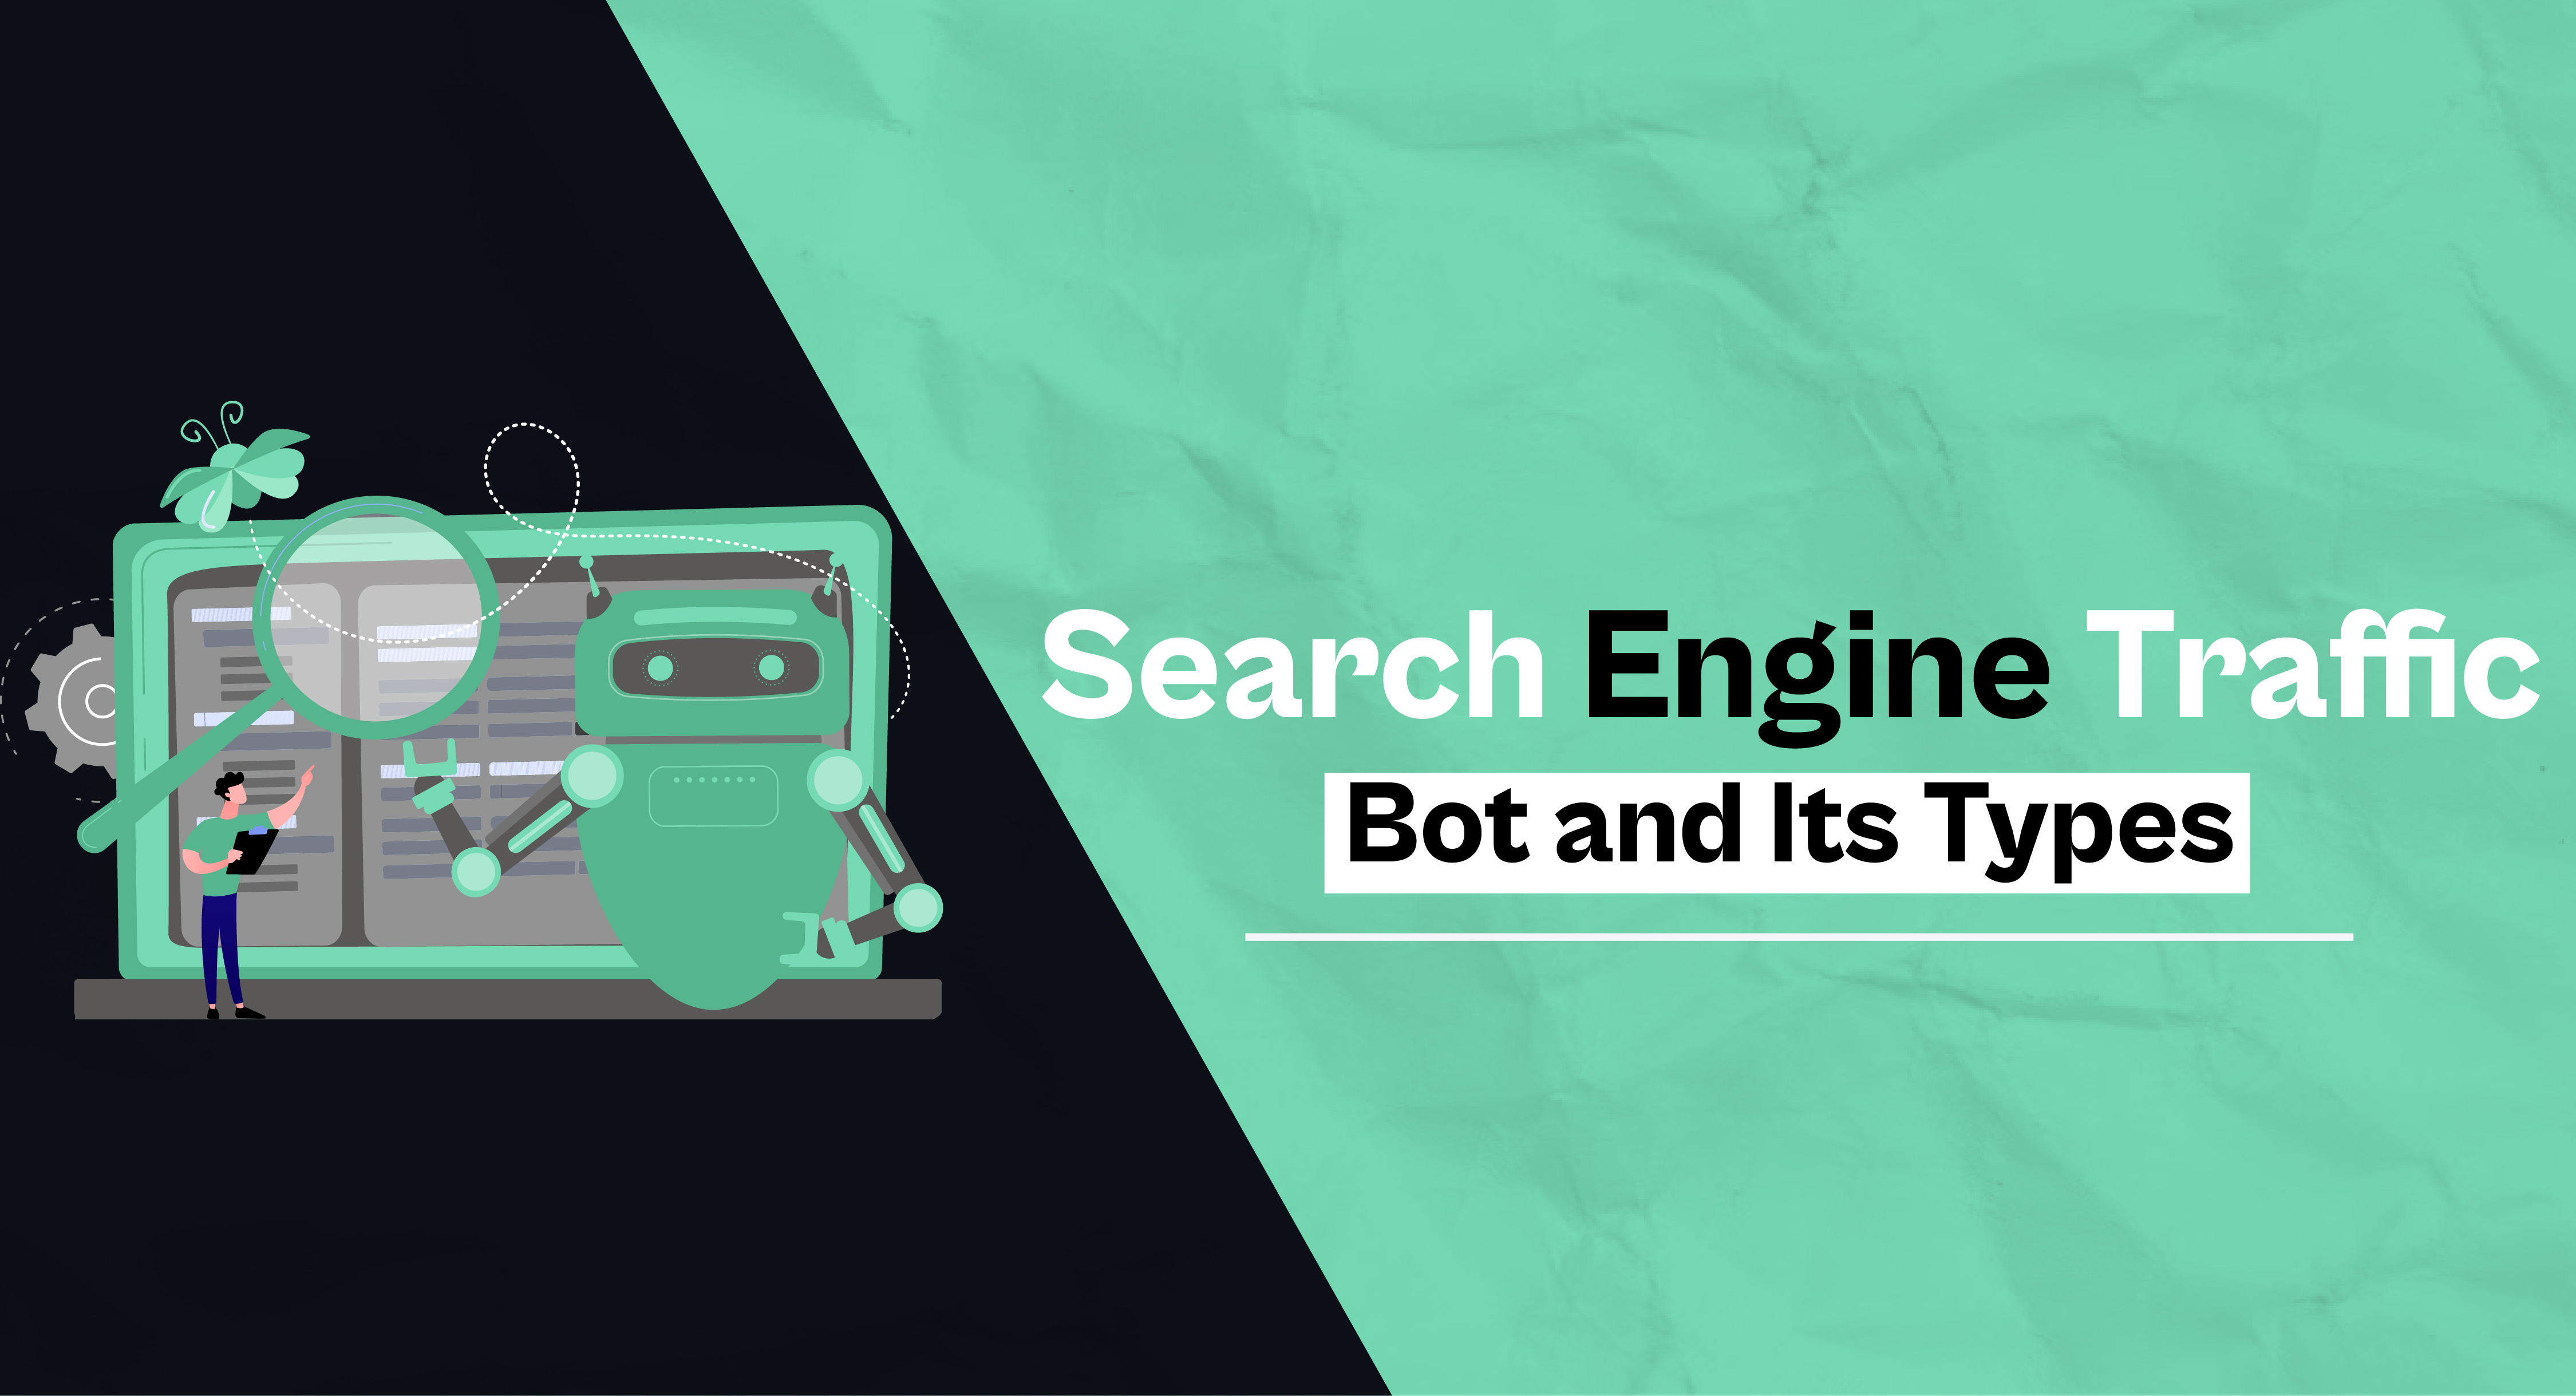 Search engine traffic: Bot and its types  